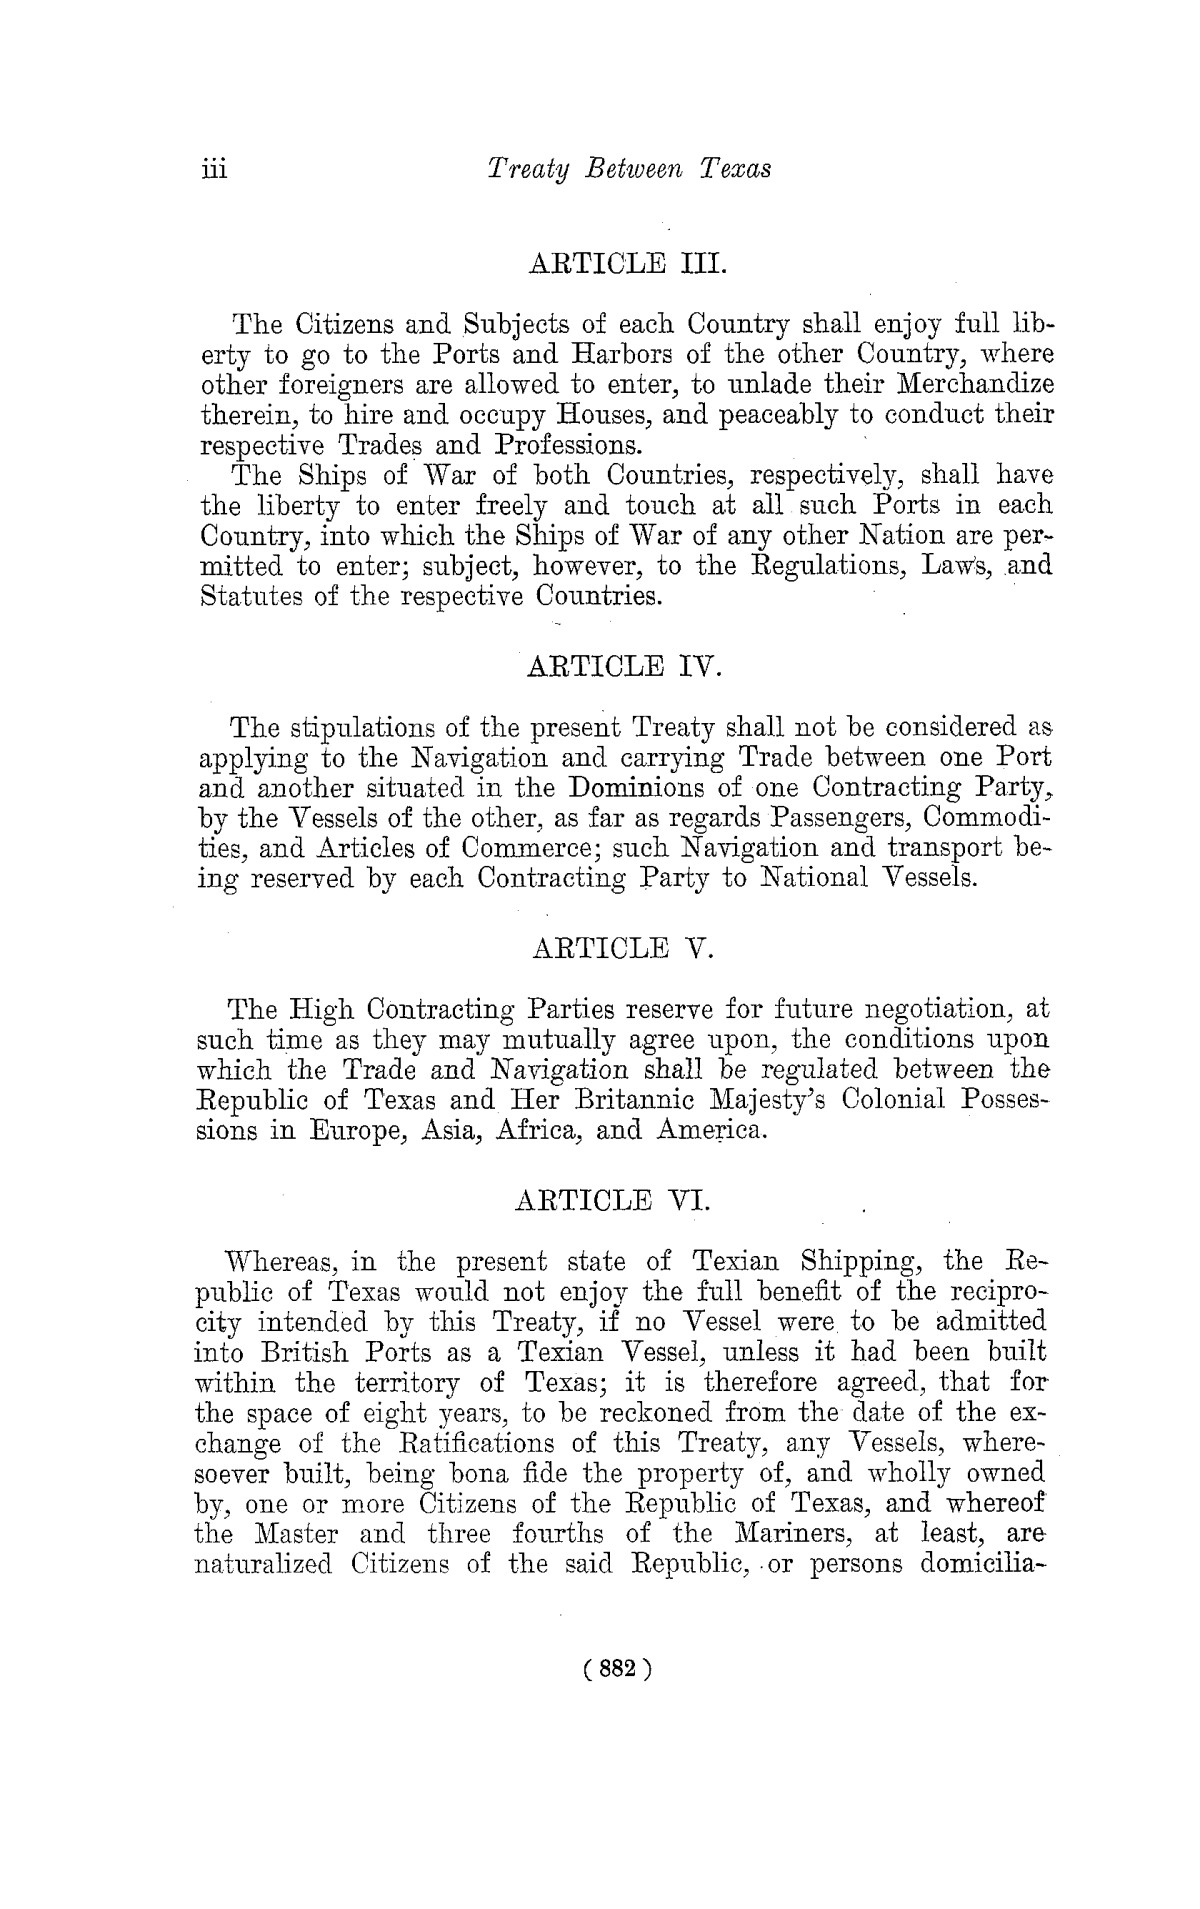 The Laws of Texas, 1822-1897 Volume 2
                                                
                                                    882
                                                